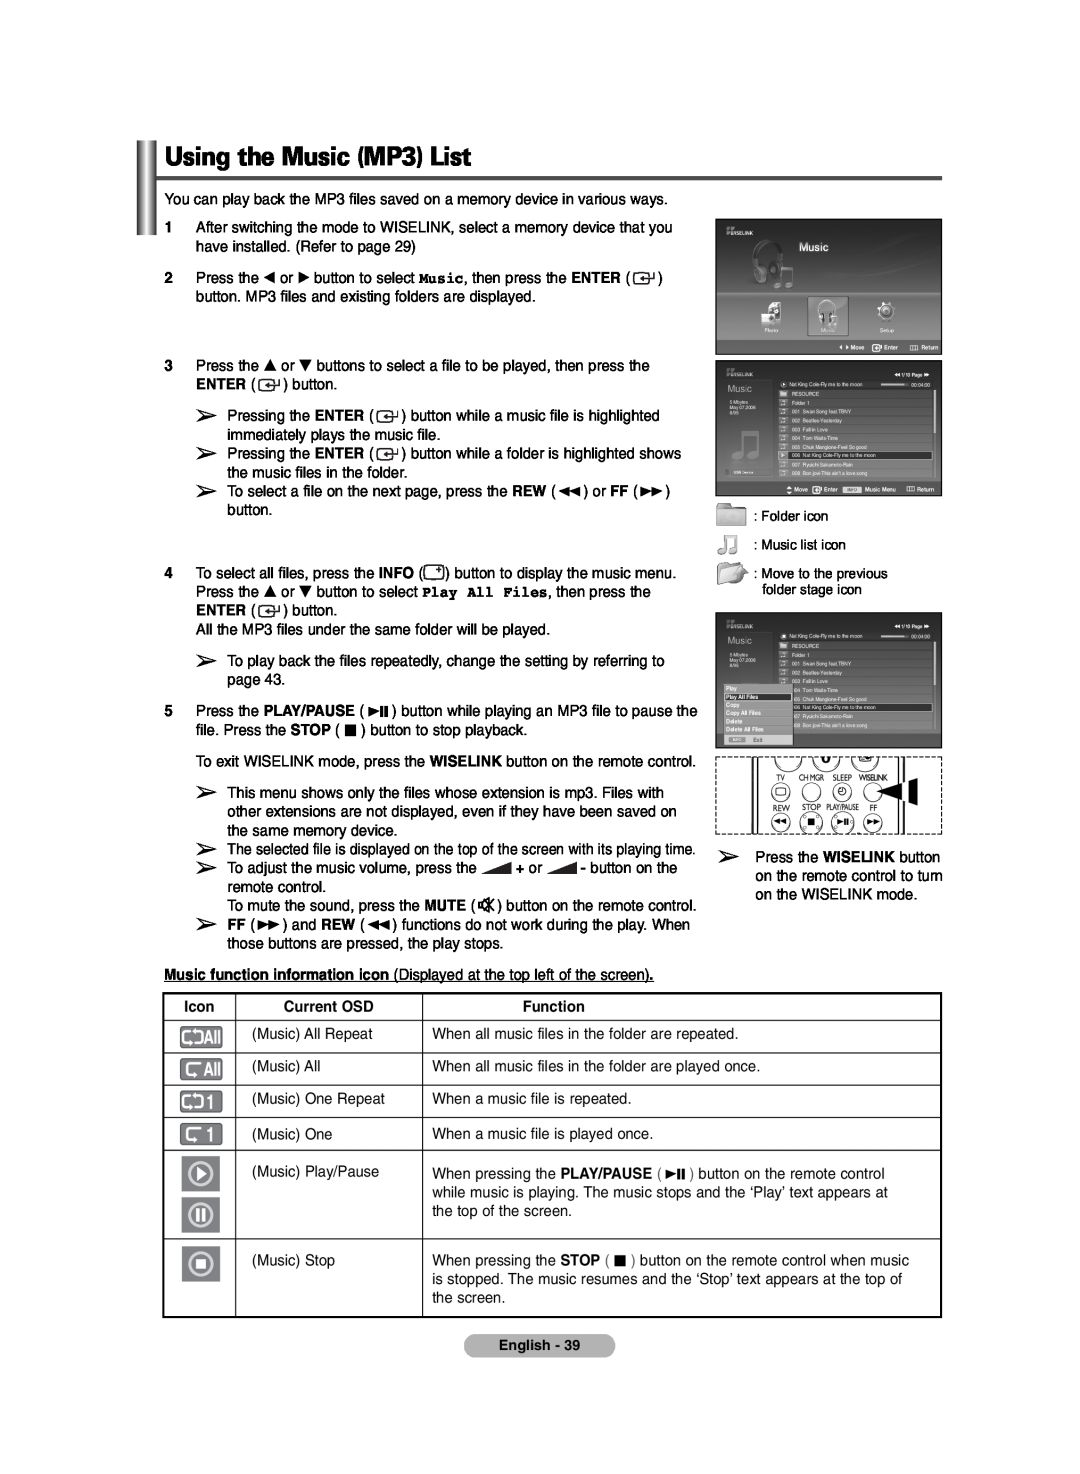 Samsung PDP-TELEVISION manual Using the Music MP3 List, Folder icon Music list icon 